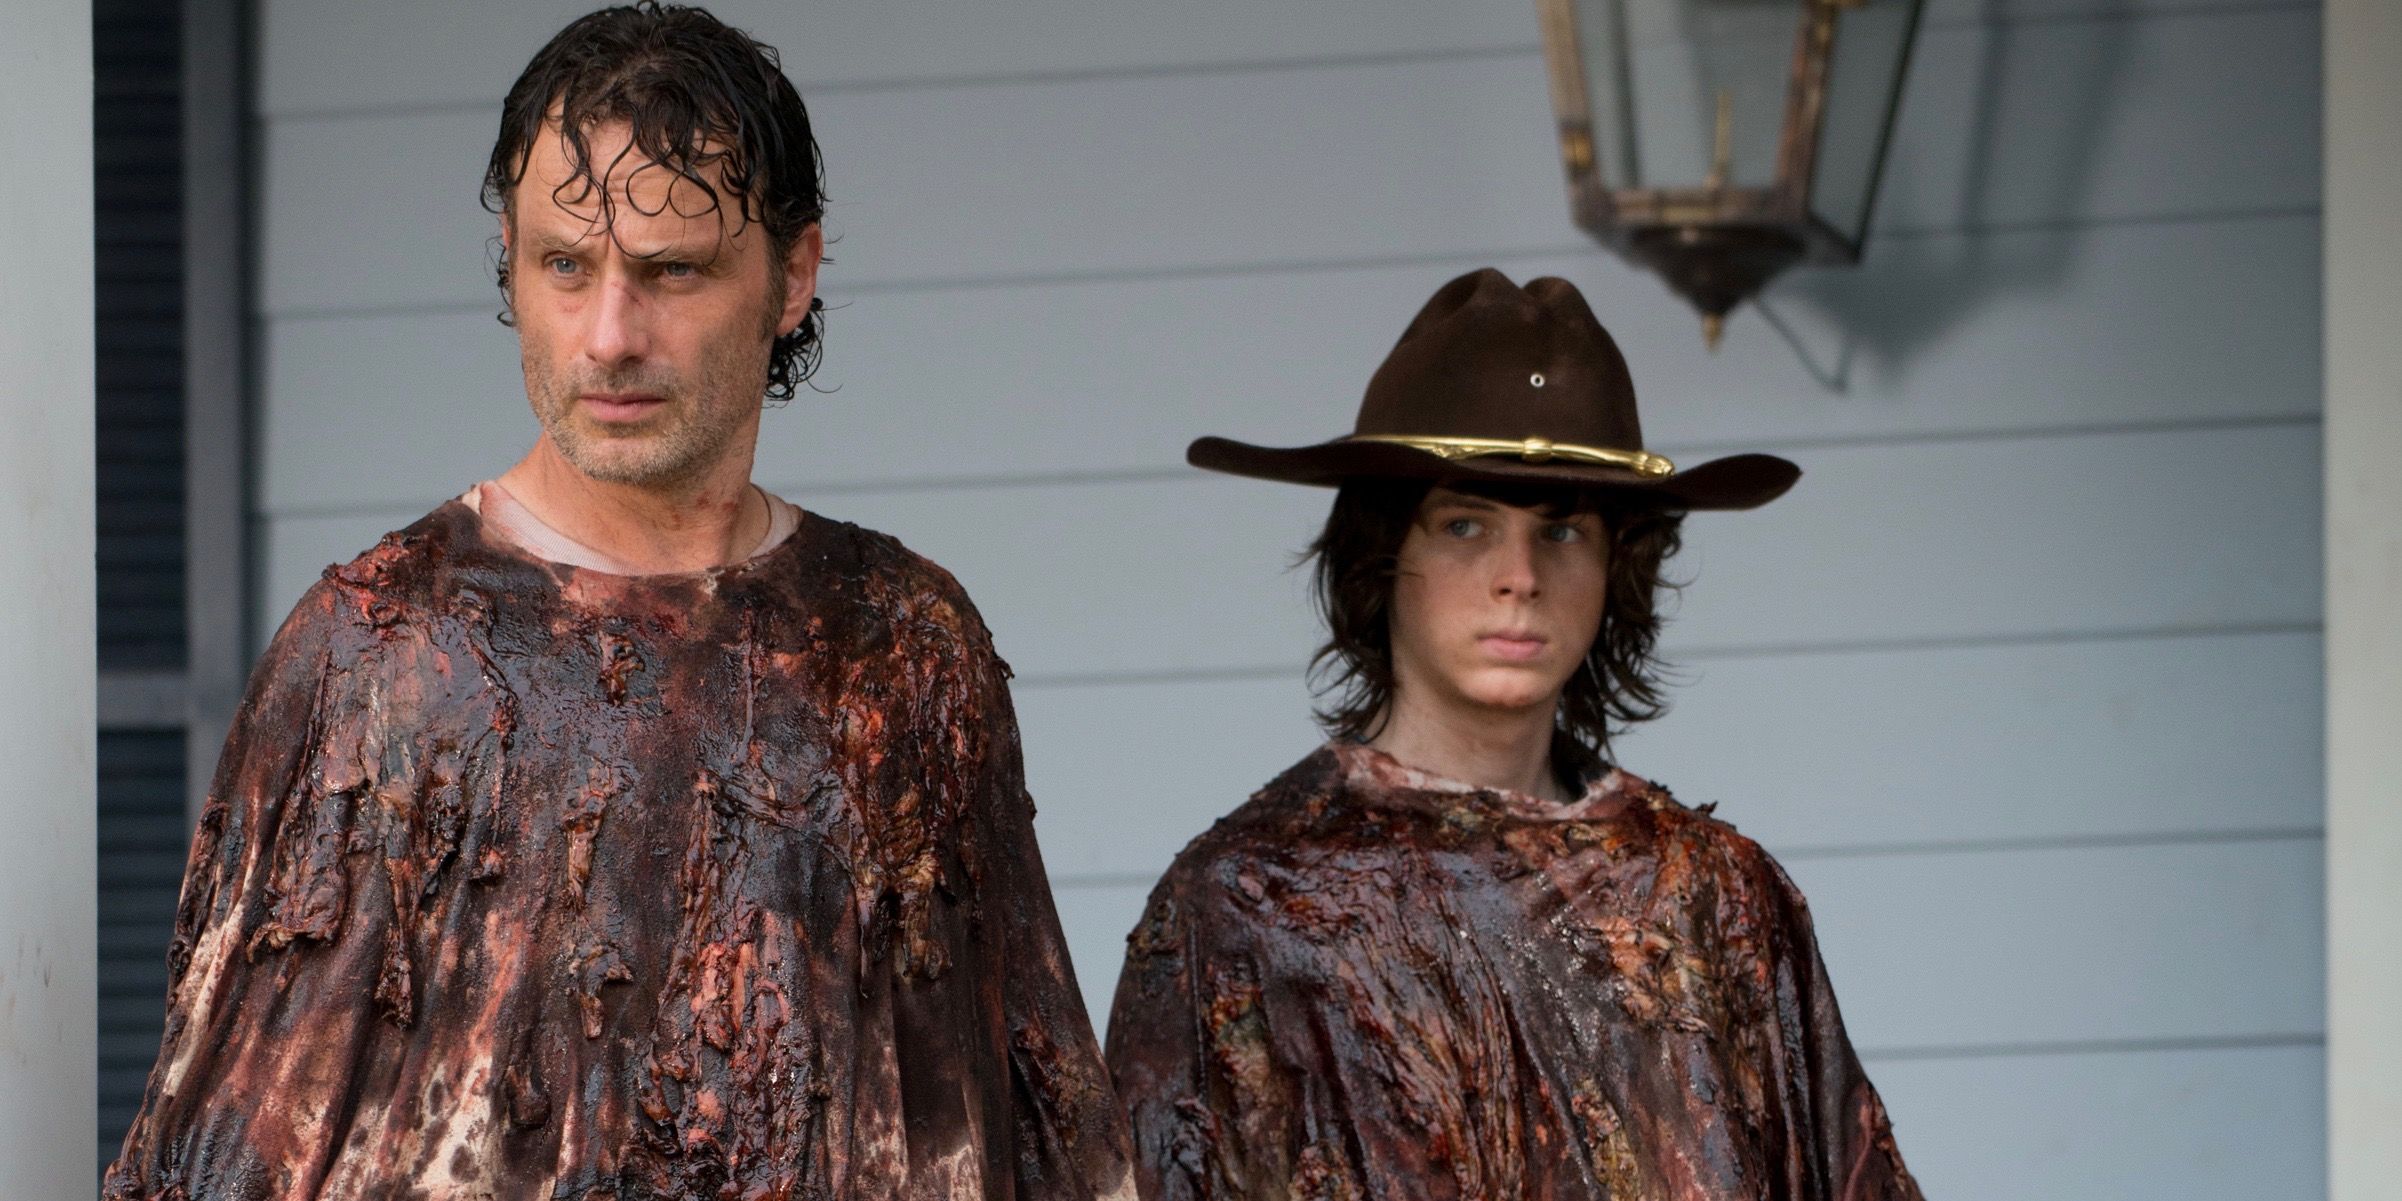 Andrew Lincoln and Chandler Riggs as Rick Grimes and Carl Grimes